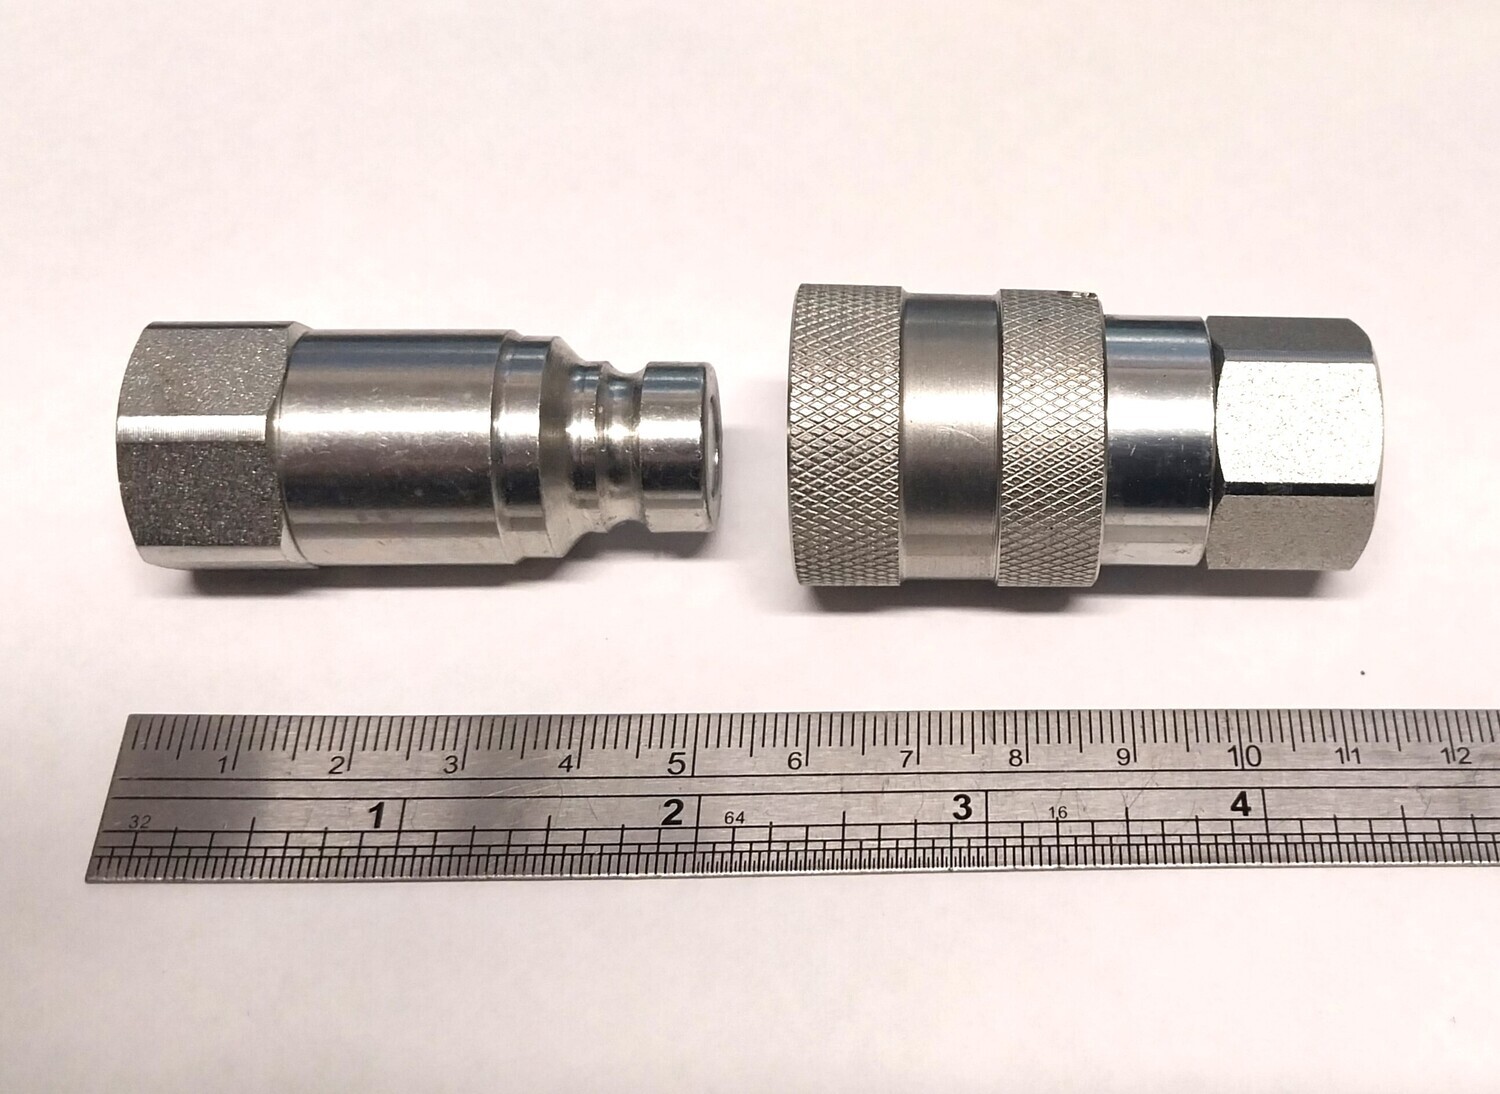 Top view of 1/4 inch dry break flat face coupler for low oil flow applications